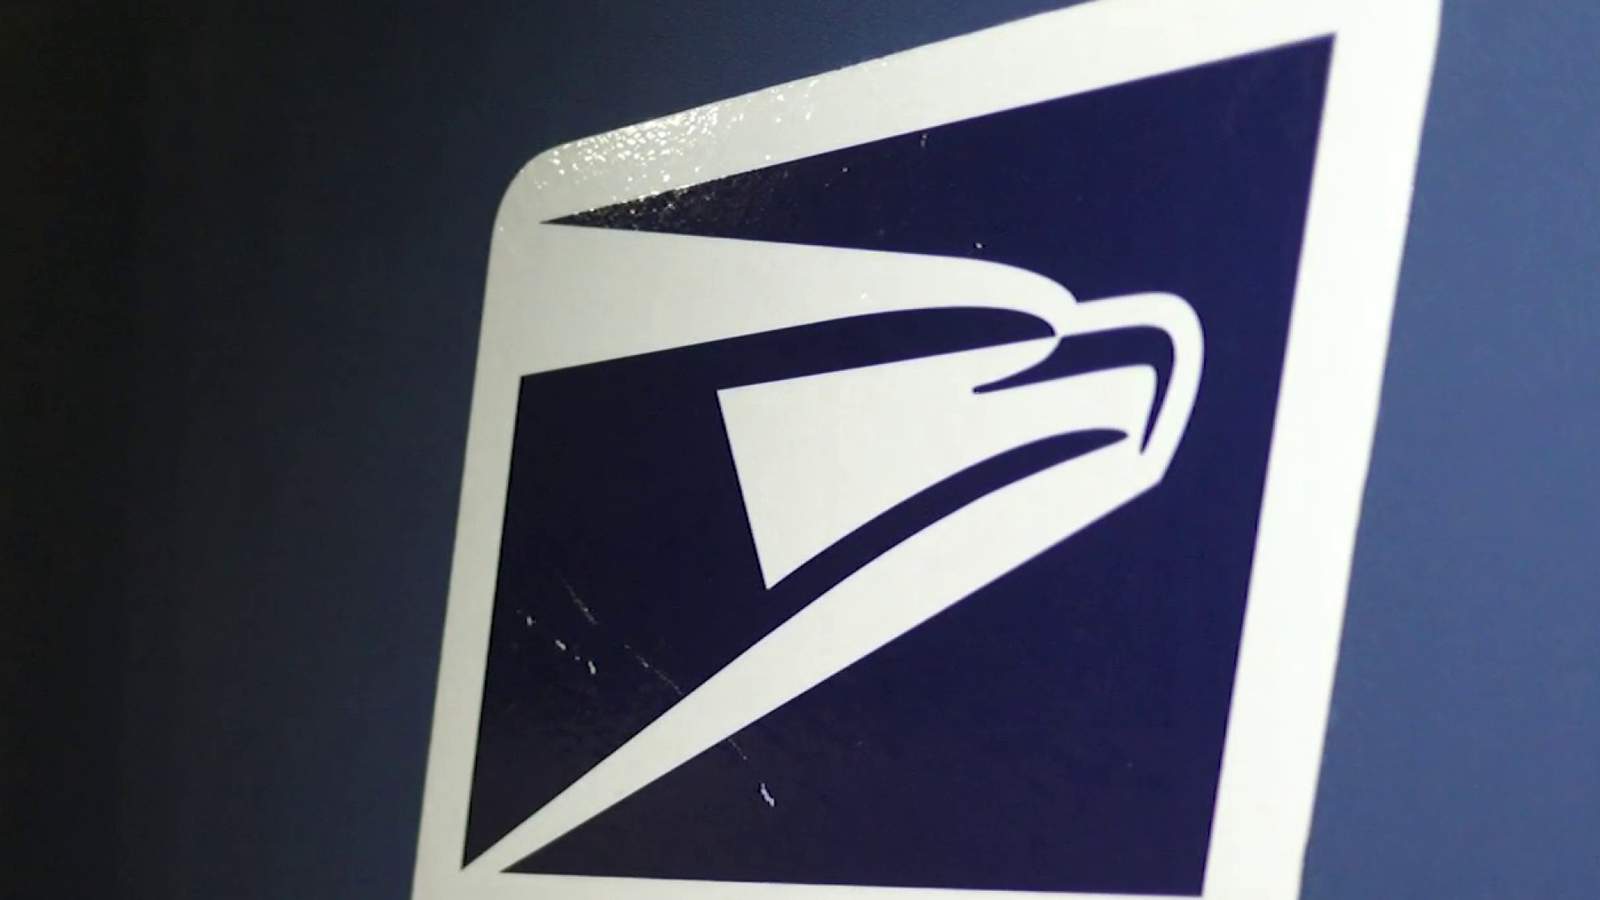 Judge: Postal Service must process election mail on time